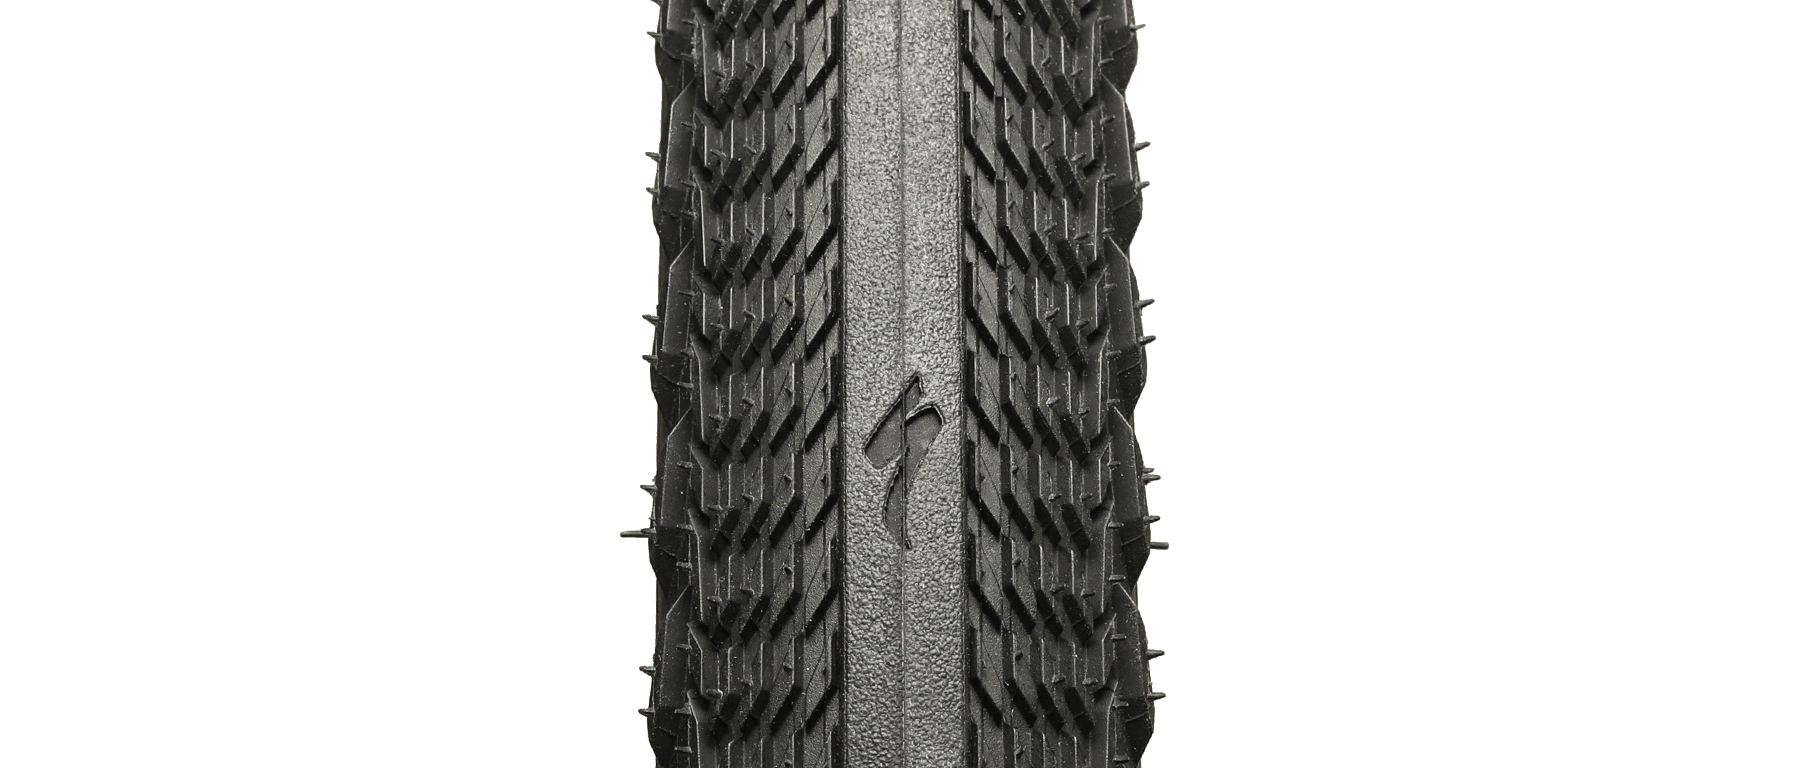 Specialized Pathfinder Pro 2Bliss Gravel Tire